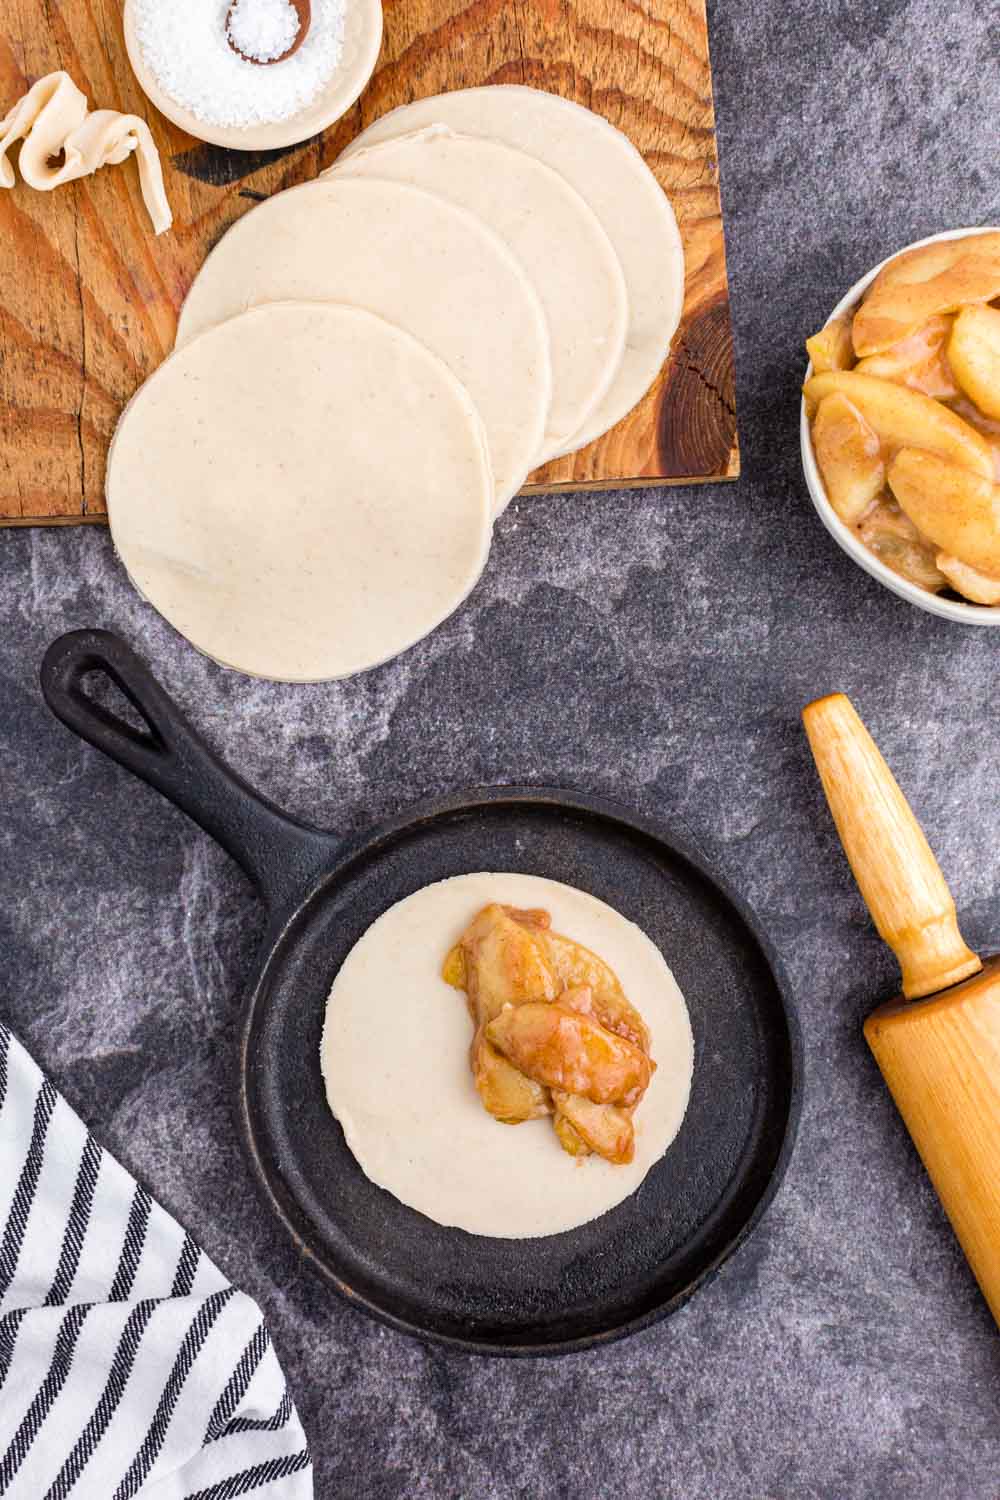 Pie crust circle in iron skillet filled with apple filling, pin roll, several pie crust circles on wooden kitchen board, bowl of sugar, bowl of apple pie filling, striped linen on black marble countertop